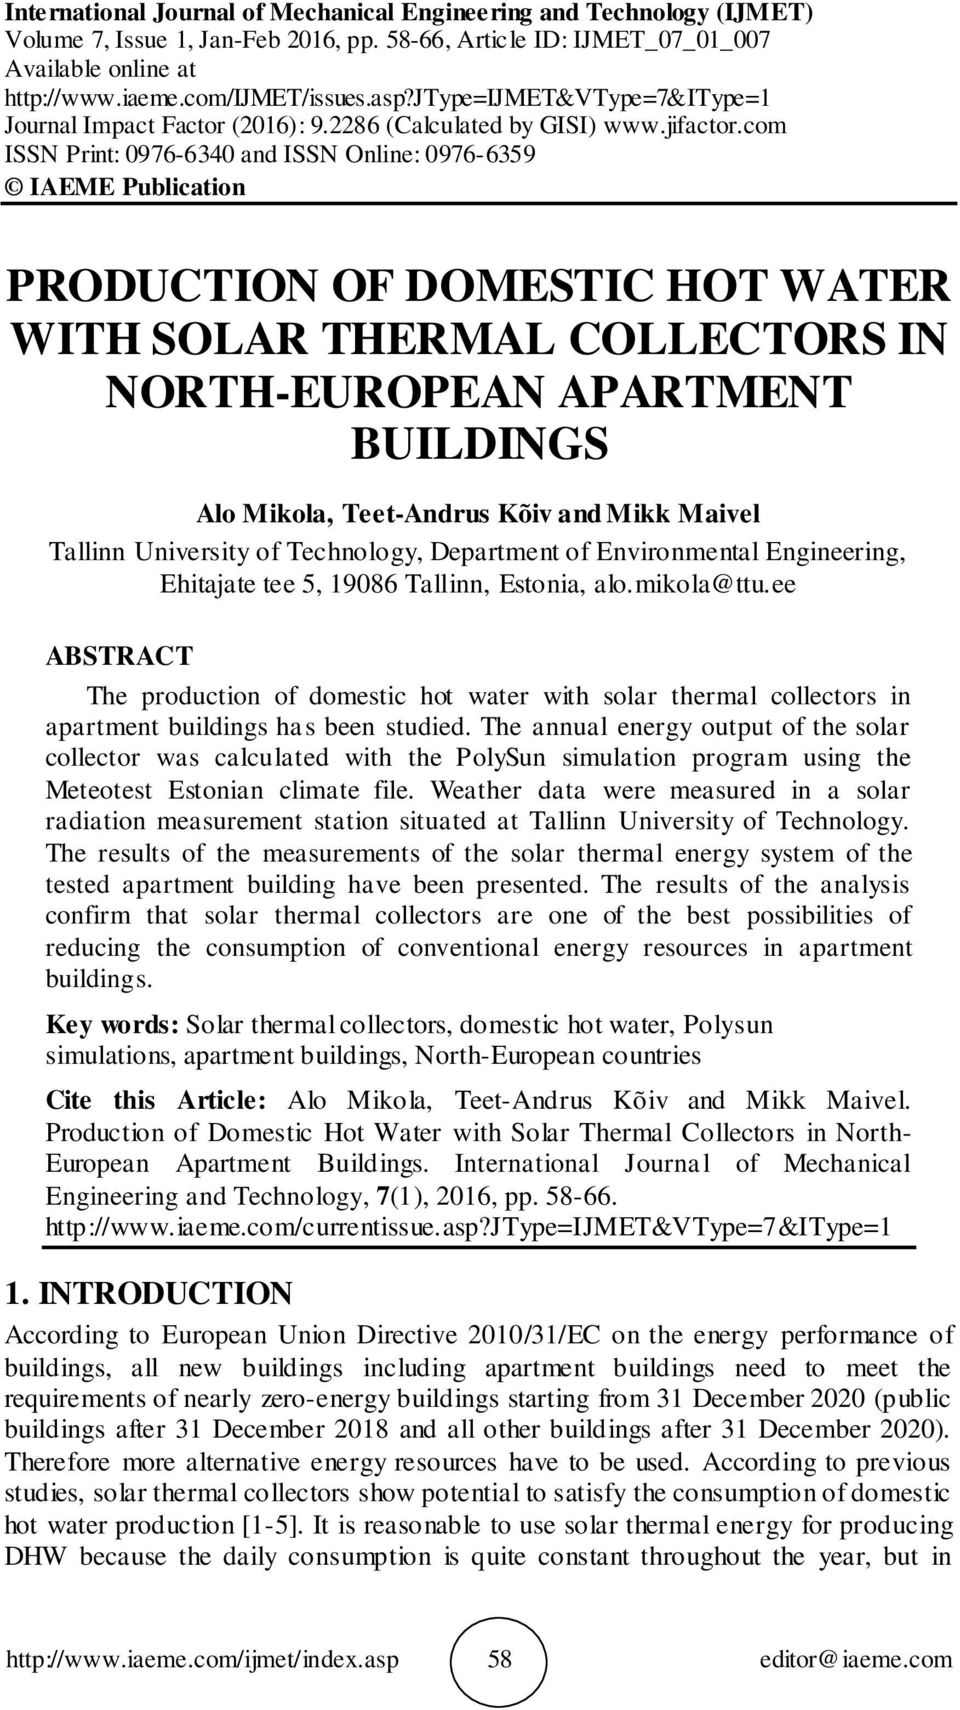 com ISSN Print: 0976-6340 and ISSN Online: 0976-6359 IAEME Publication PRODUCTION OF DOMESTIC HOT WATER WITH SOLAR THERMAL COLLECTORS IN NORTH-EUROPEAN APARTMENT BUILDINGS Alo Mikola, Teet-Andrus